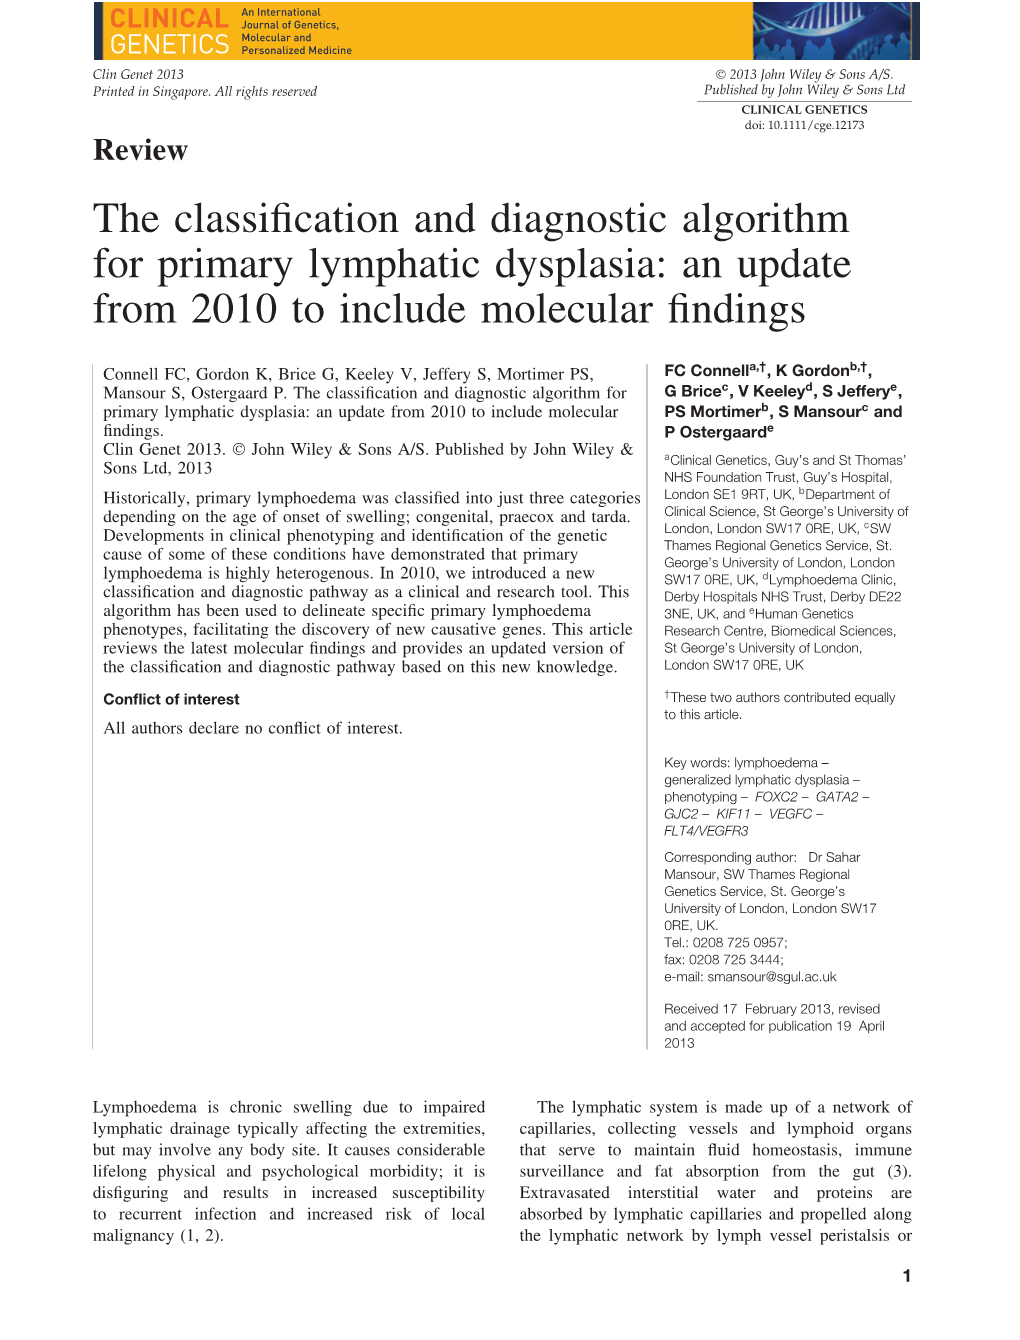 The Classification and Diagnostic Algorithm For